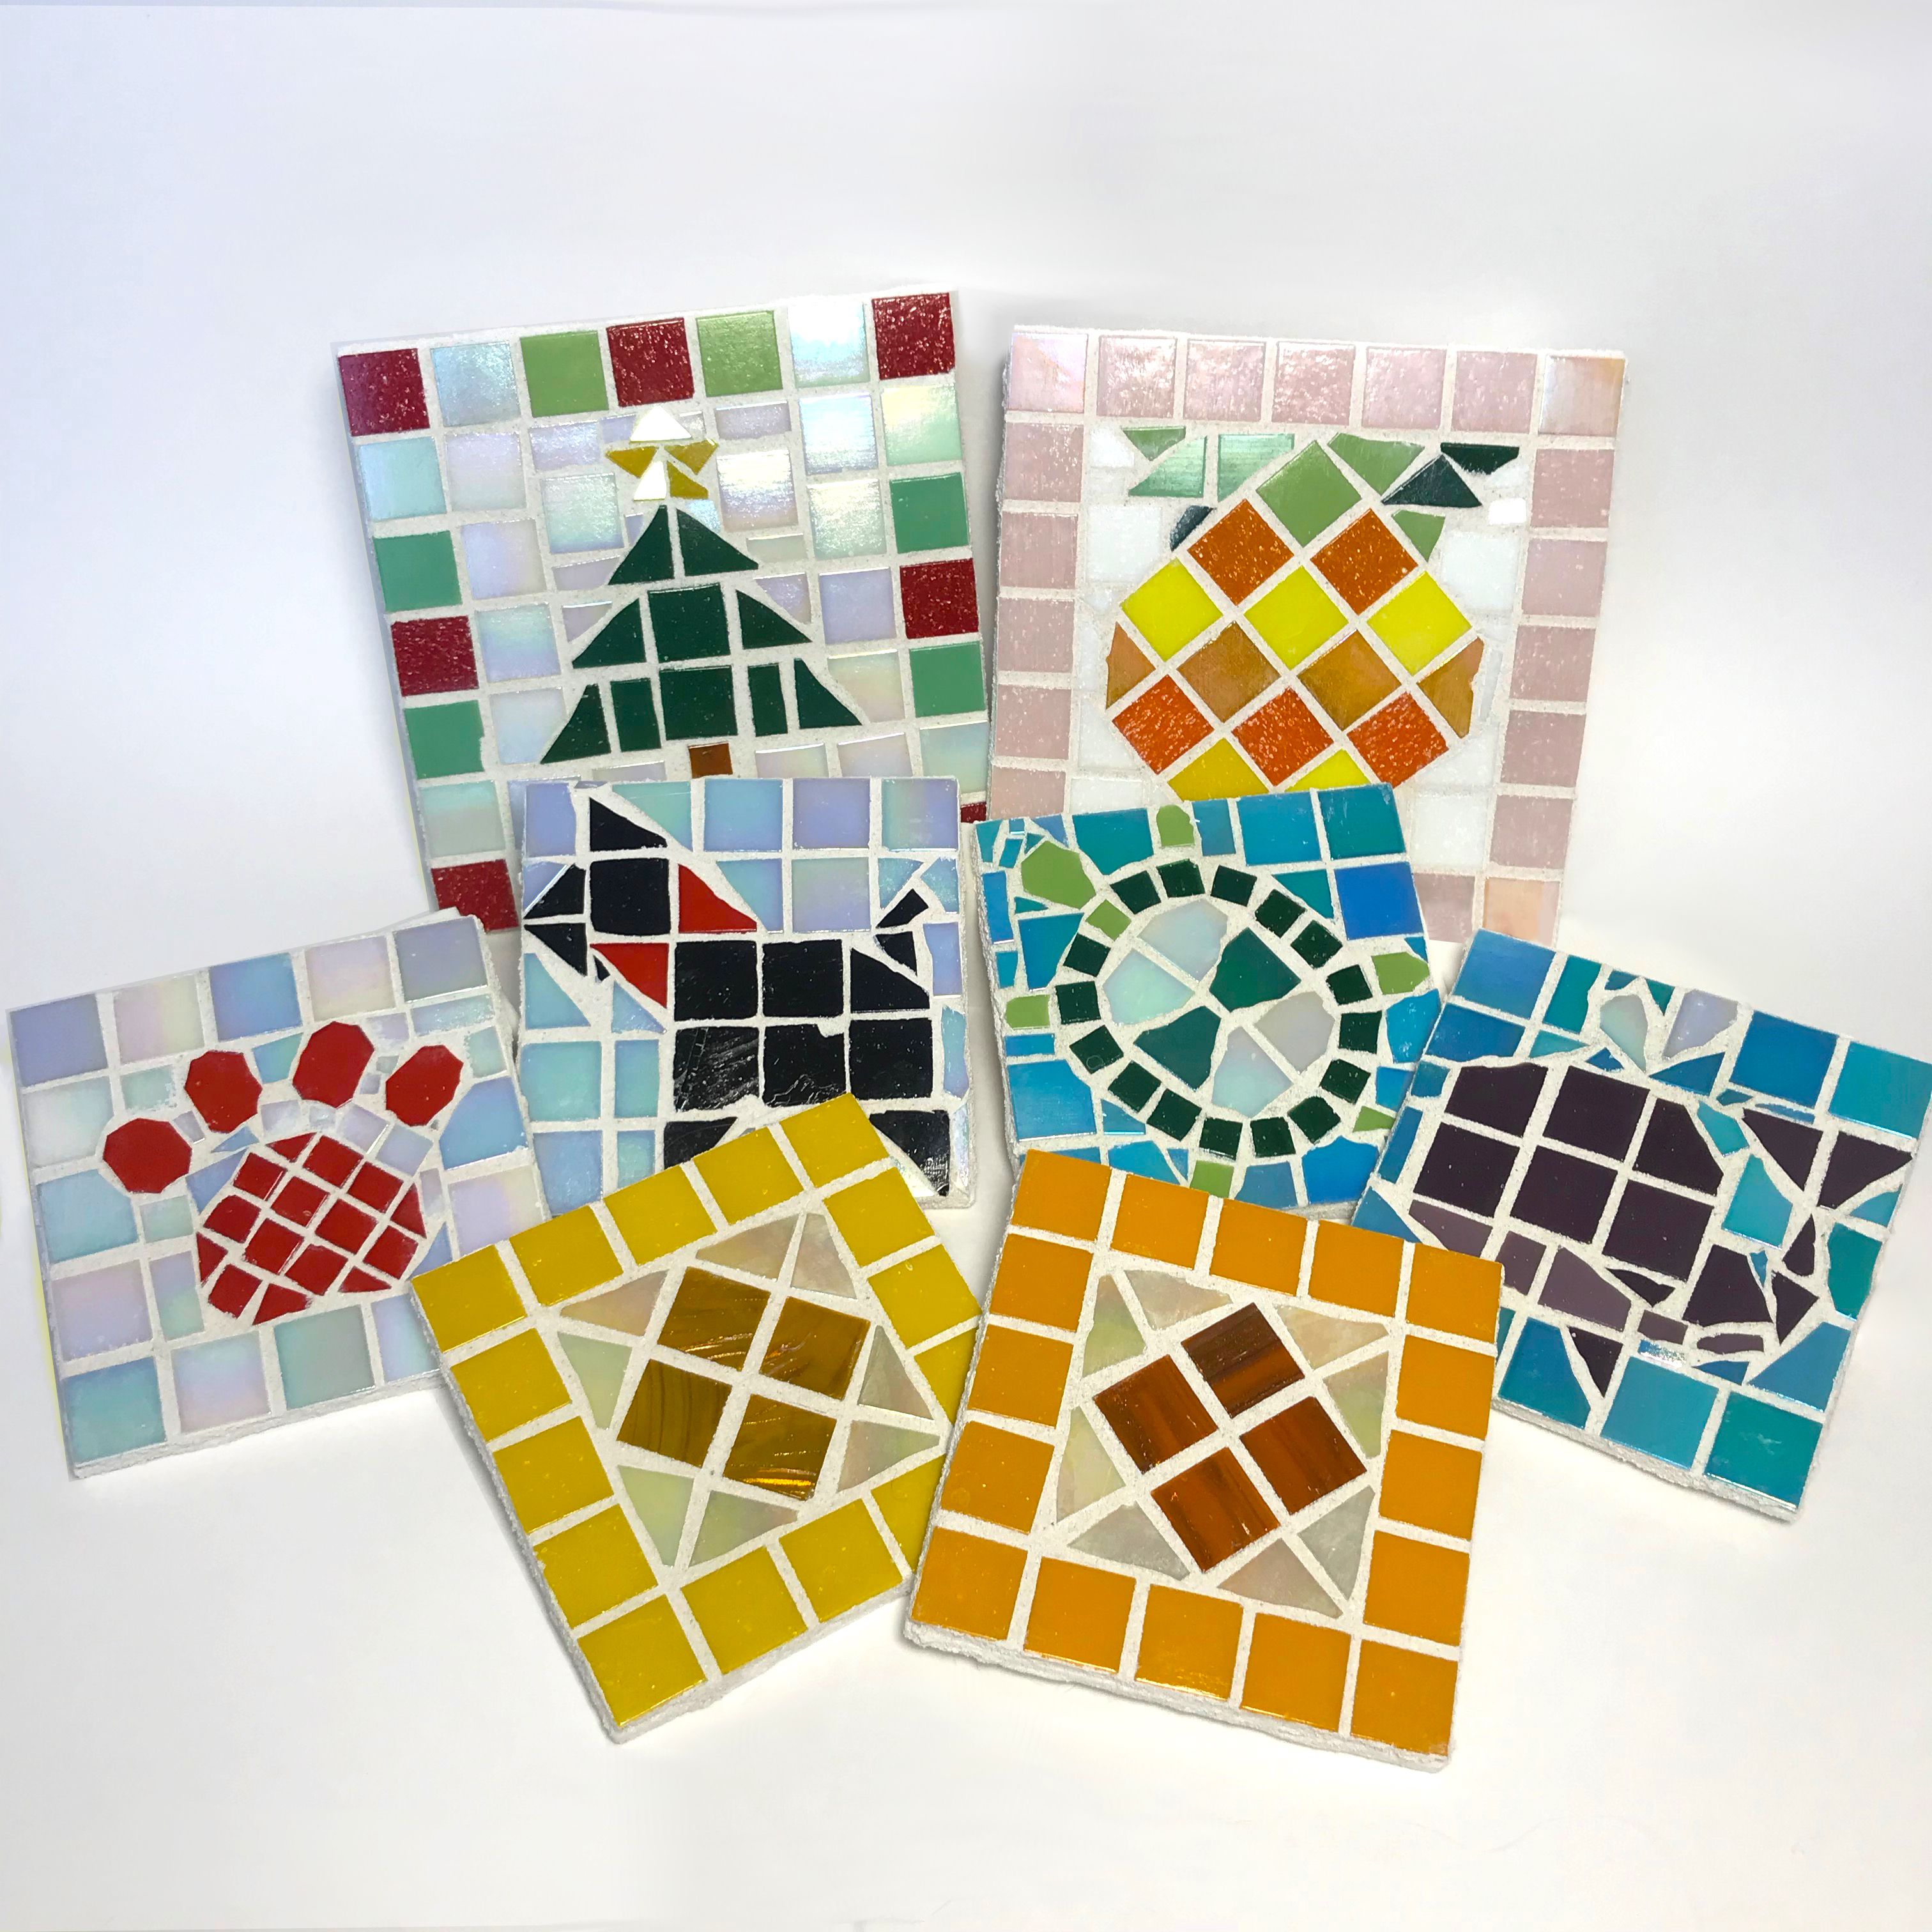 A Make a Mosaic Customize Two Coasters or One Potholder experience project by Yaymaker